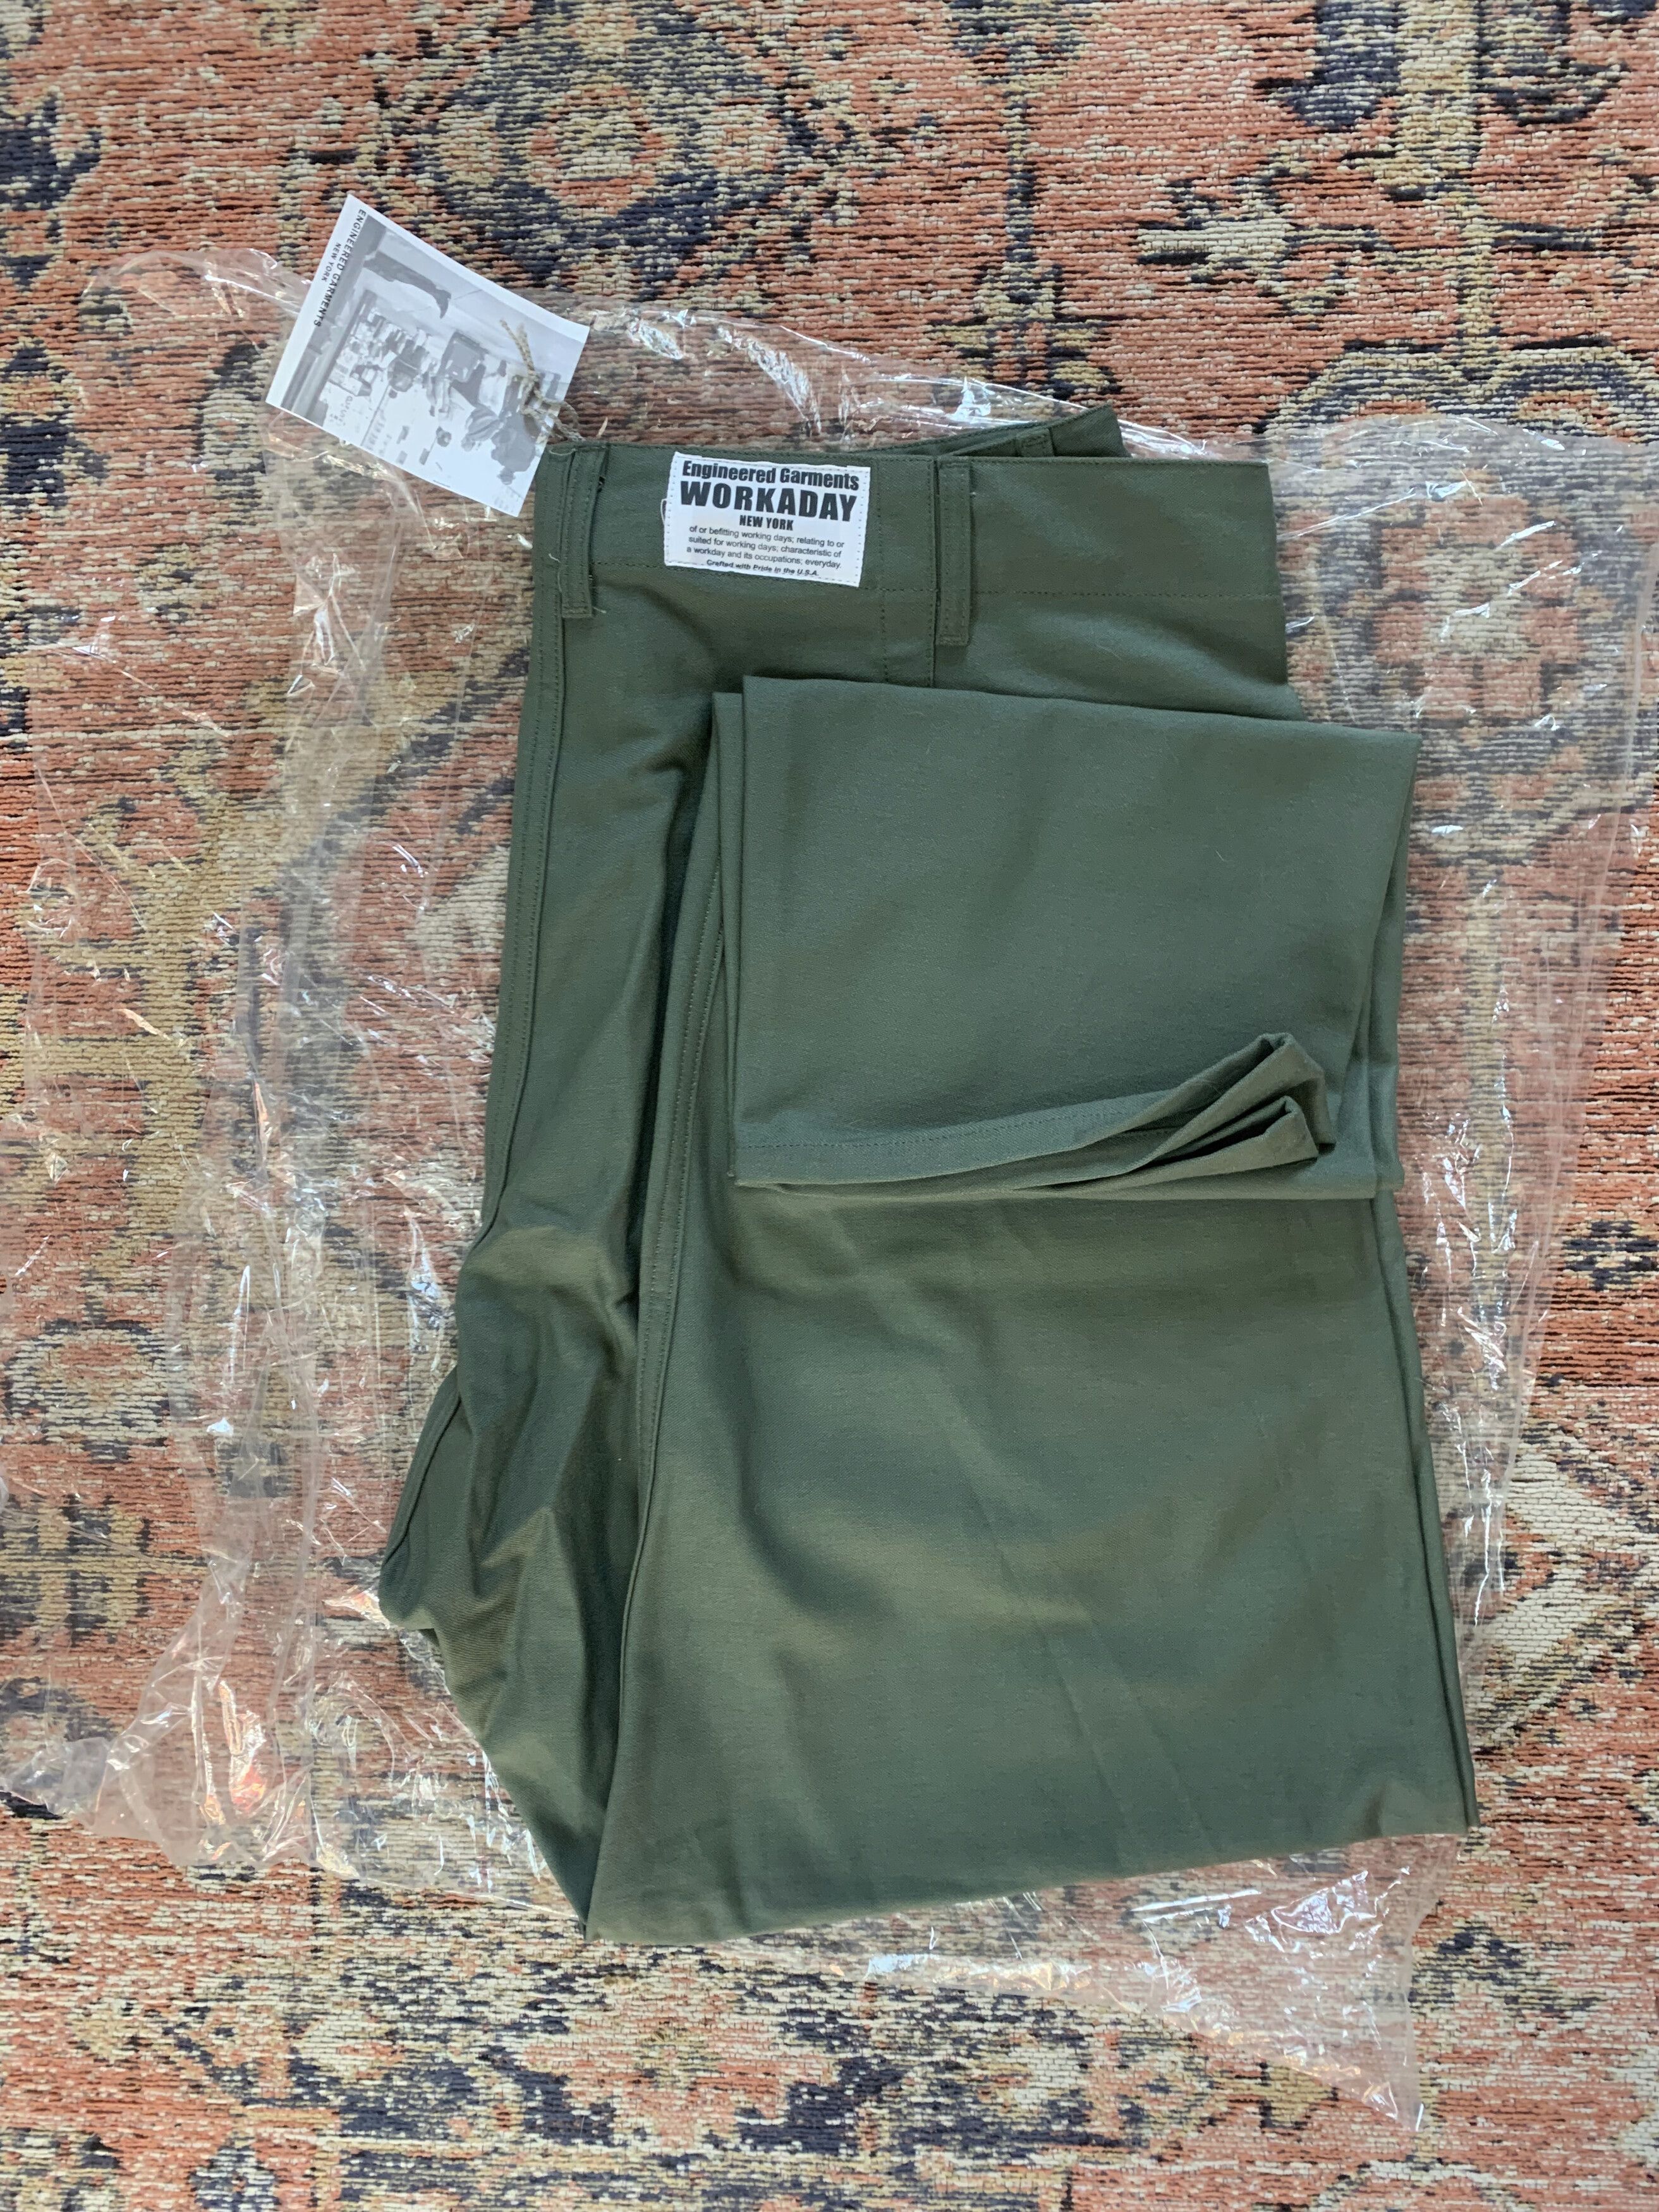 Pre-owned Engineered Garments Workaday Fatigue Pants In Green